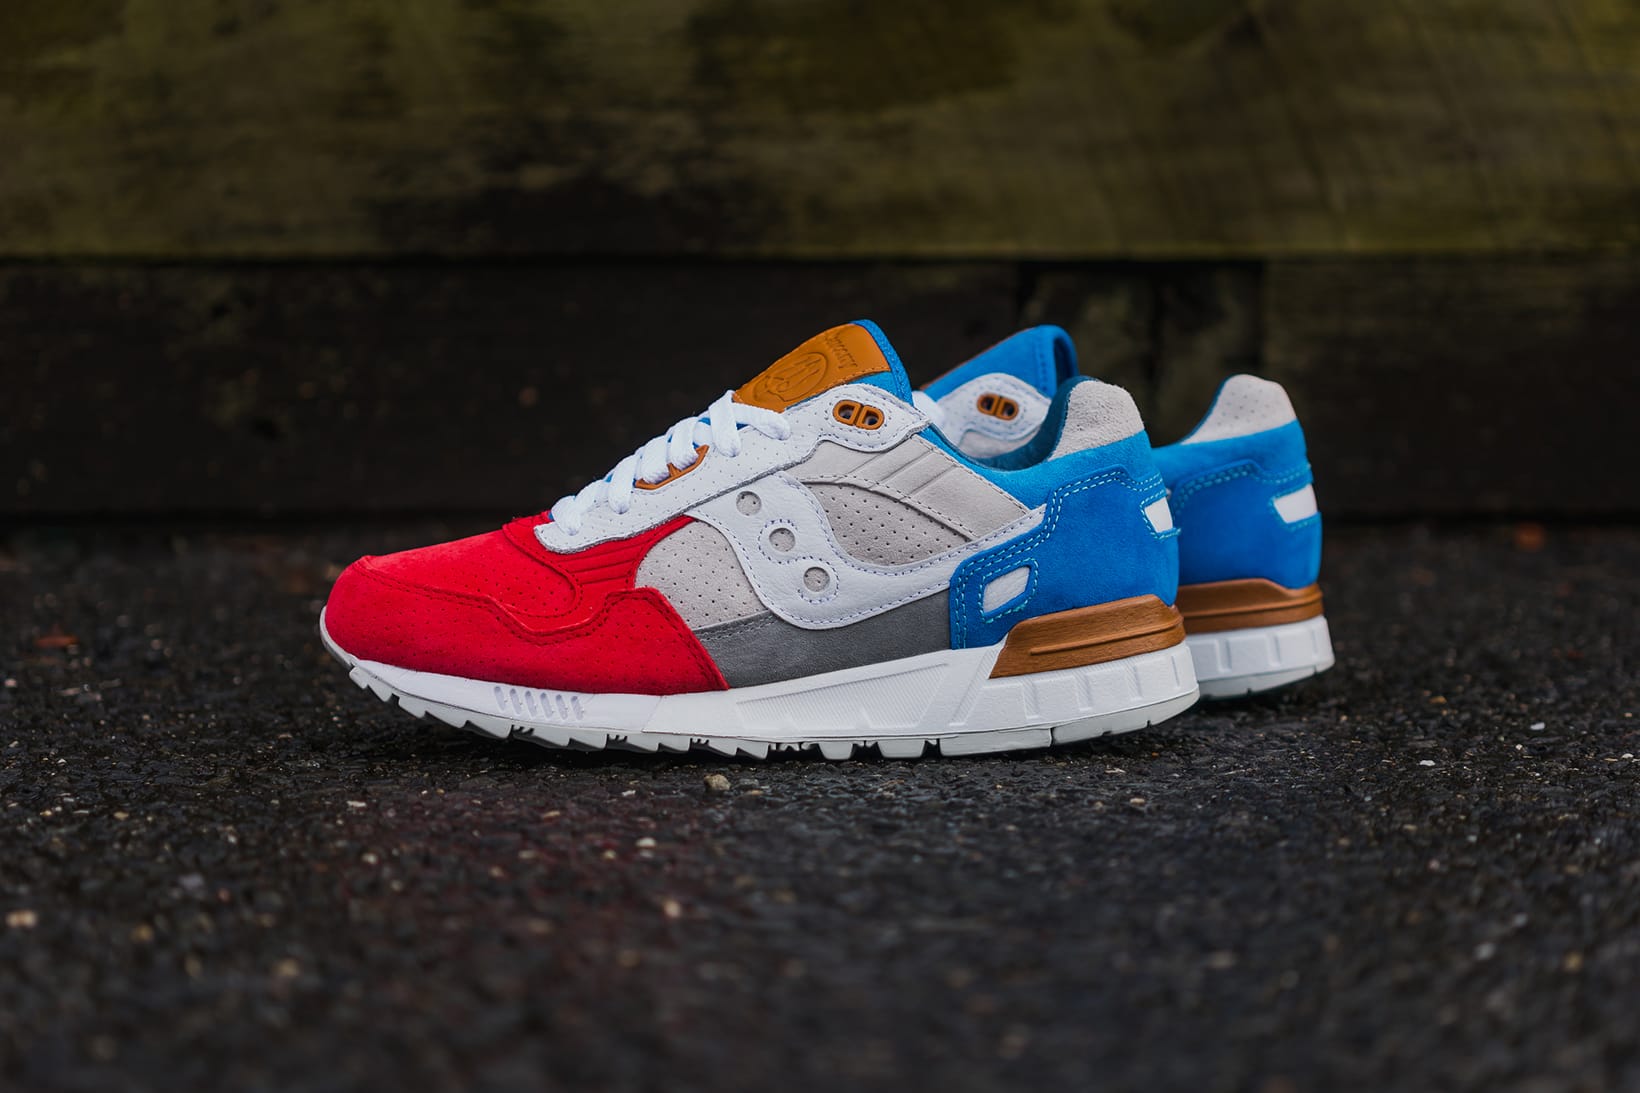 saucony shadow 5000 limited edition